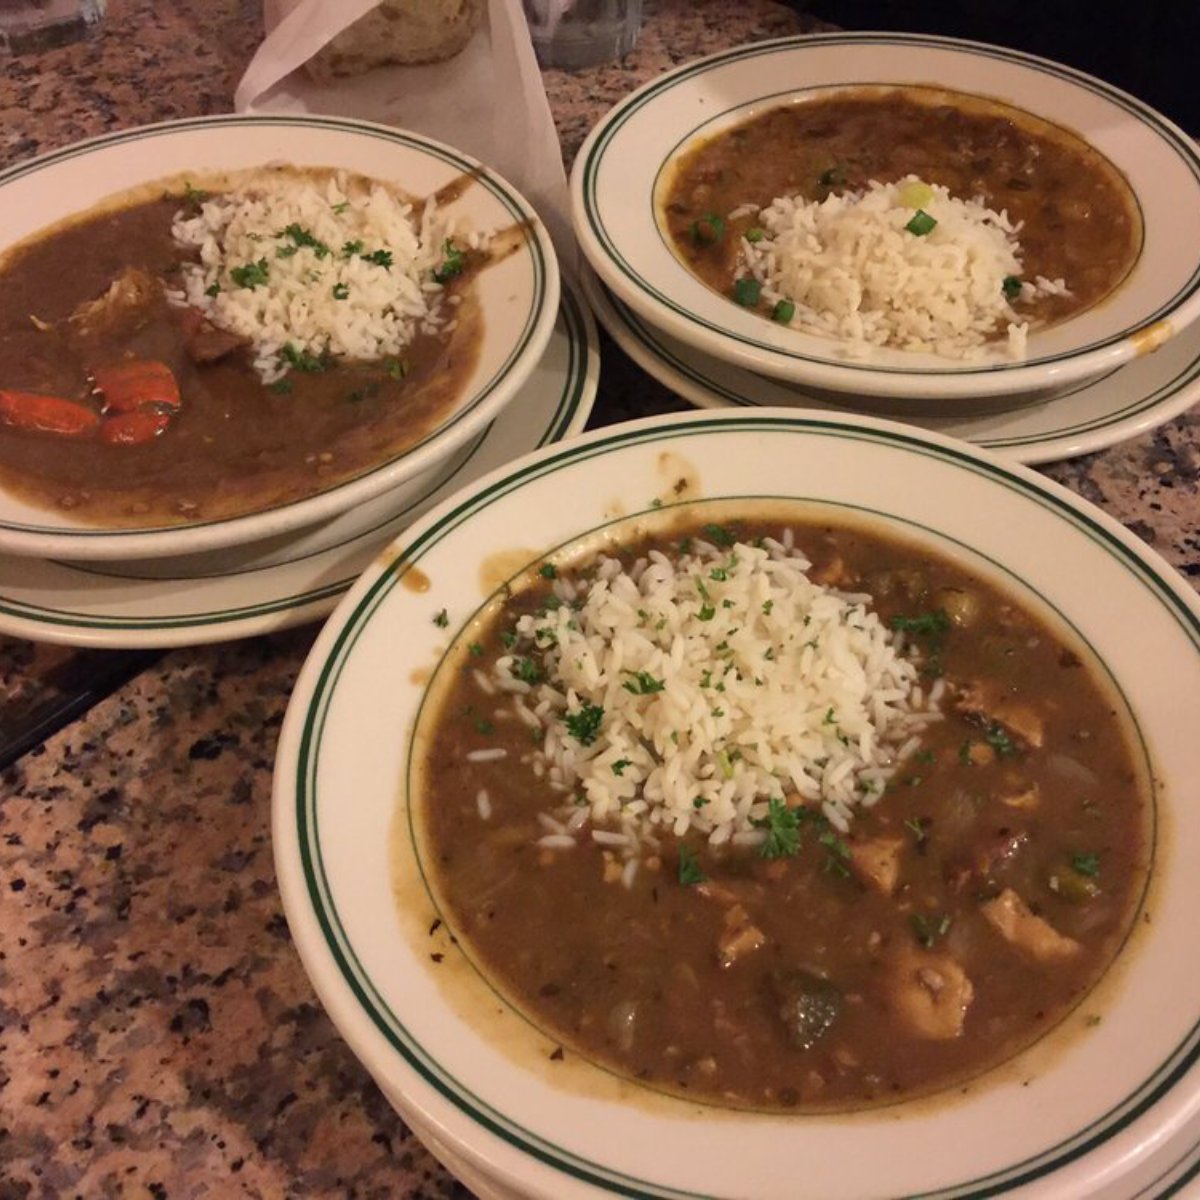 Three bowls of gumbo and rice